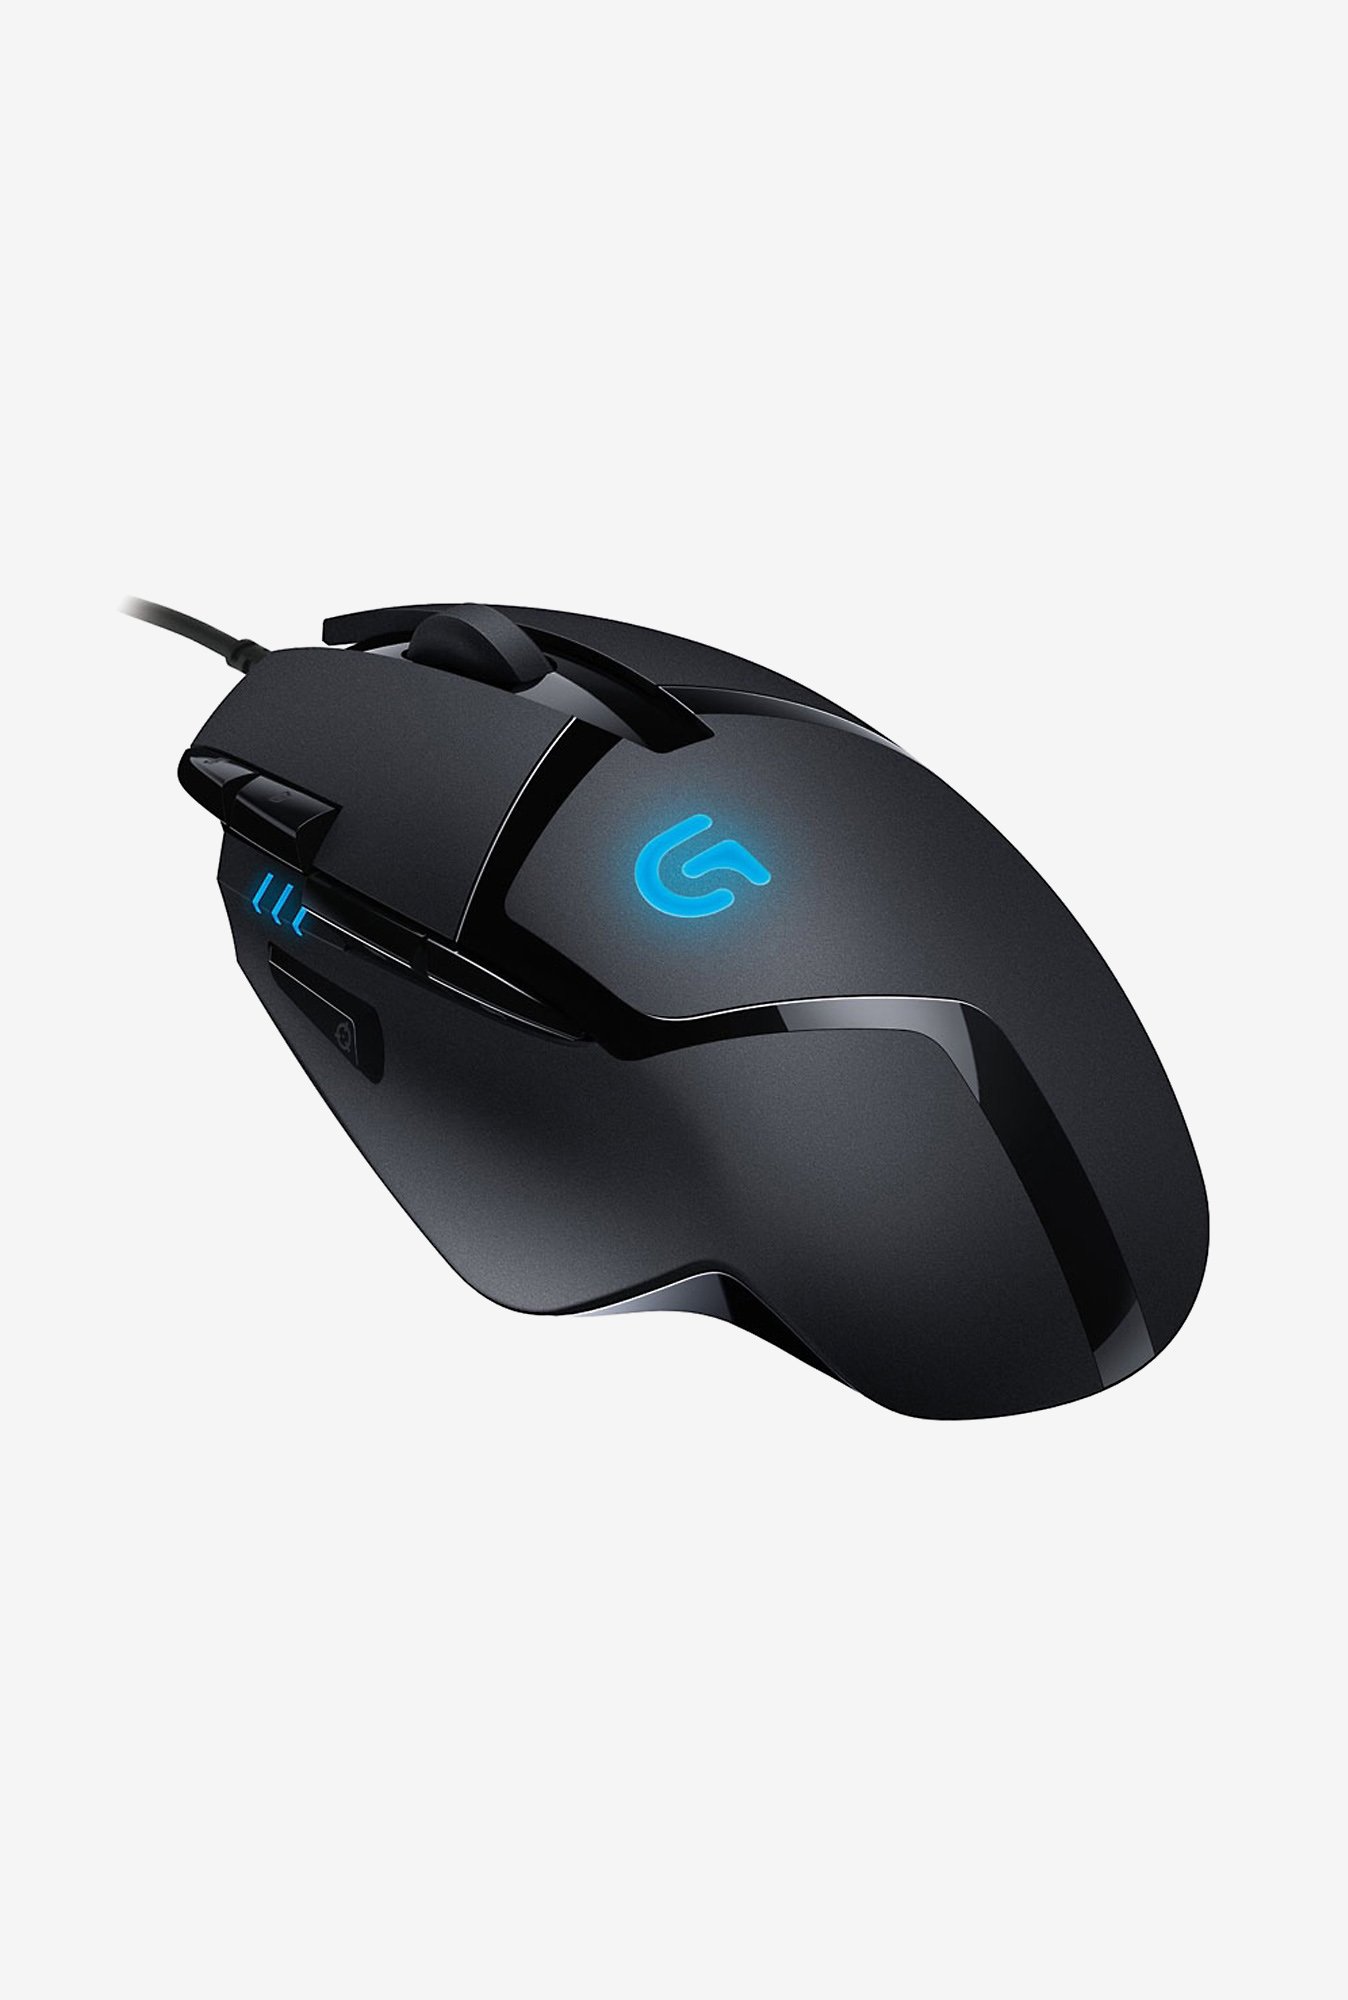 Logitech G402 Hyperion Fury FPS Gaming Mouse M-U0041 - 5